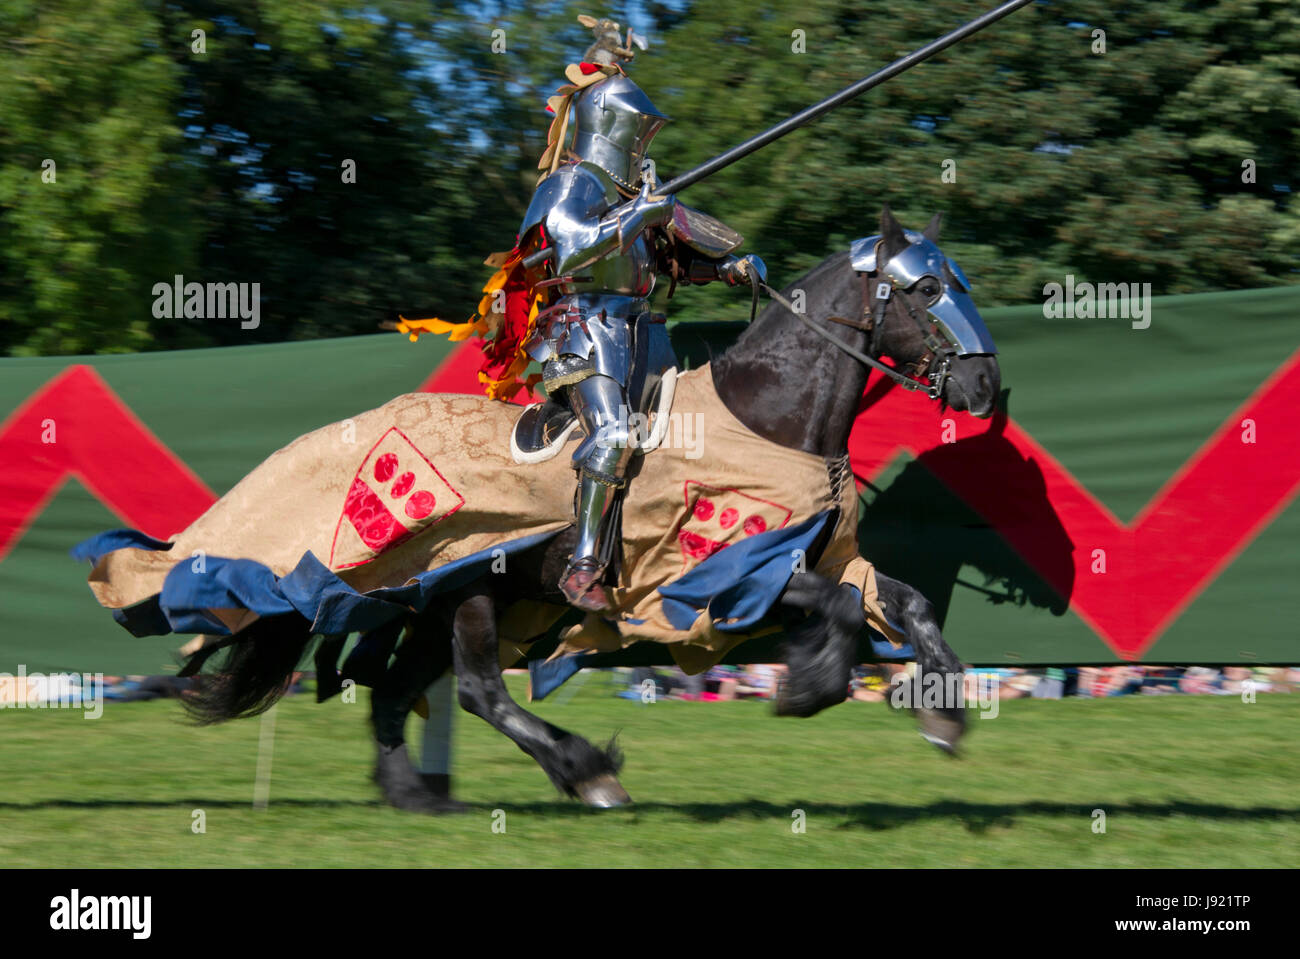 Knights jousting tournament at Bolsover Castle, Chesterfield, Derbyshire, UK Stock Photo